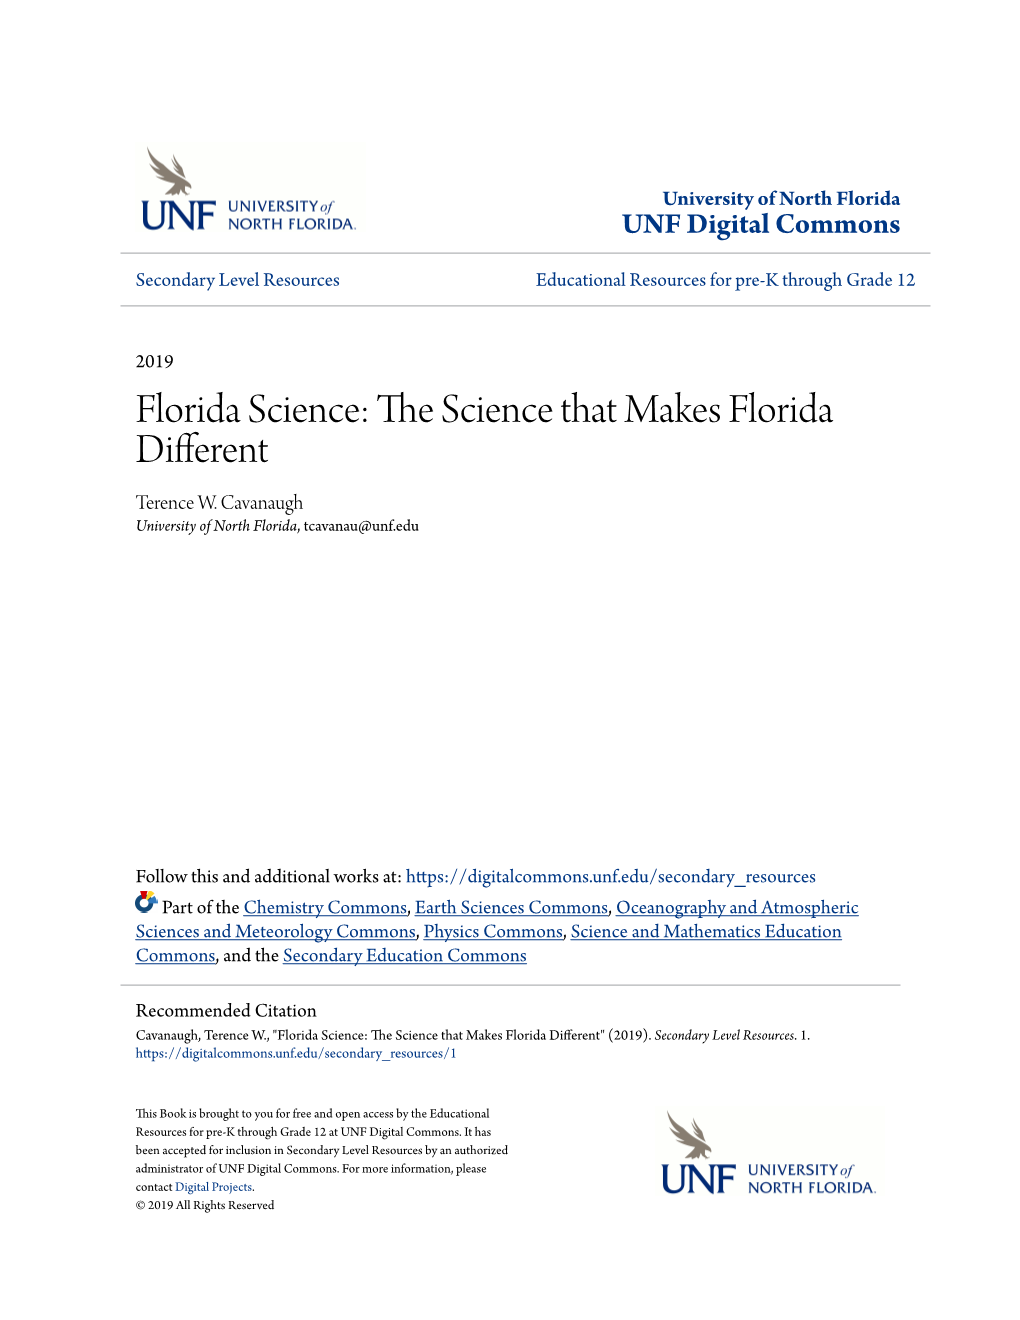 Florida Science: the Cs Ience That Makes Florida Different Terence W